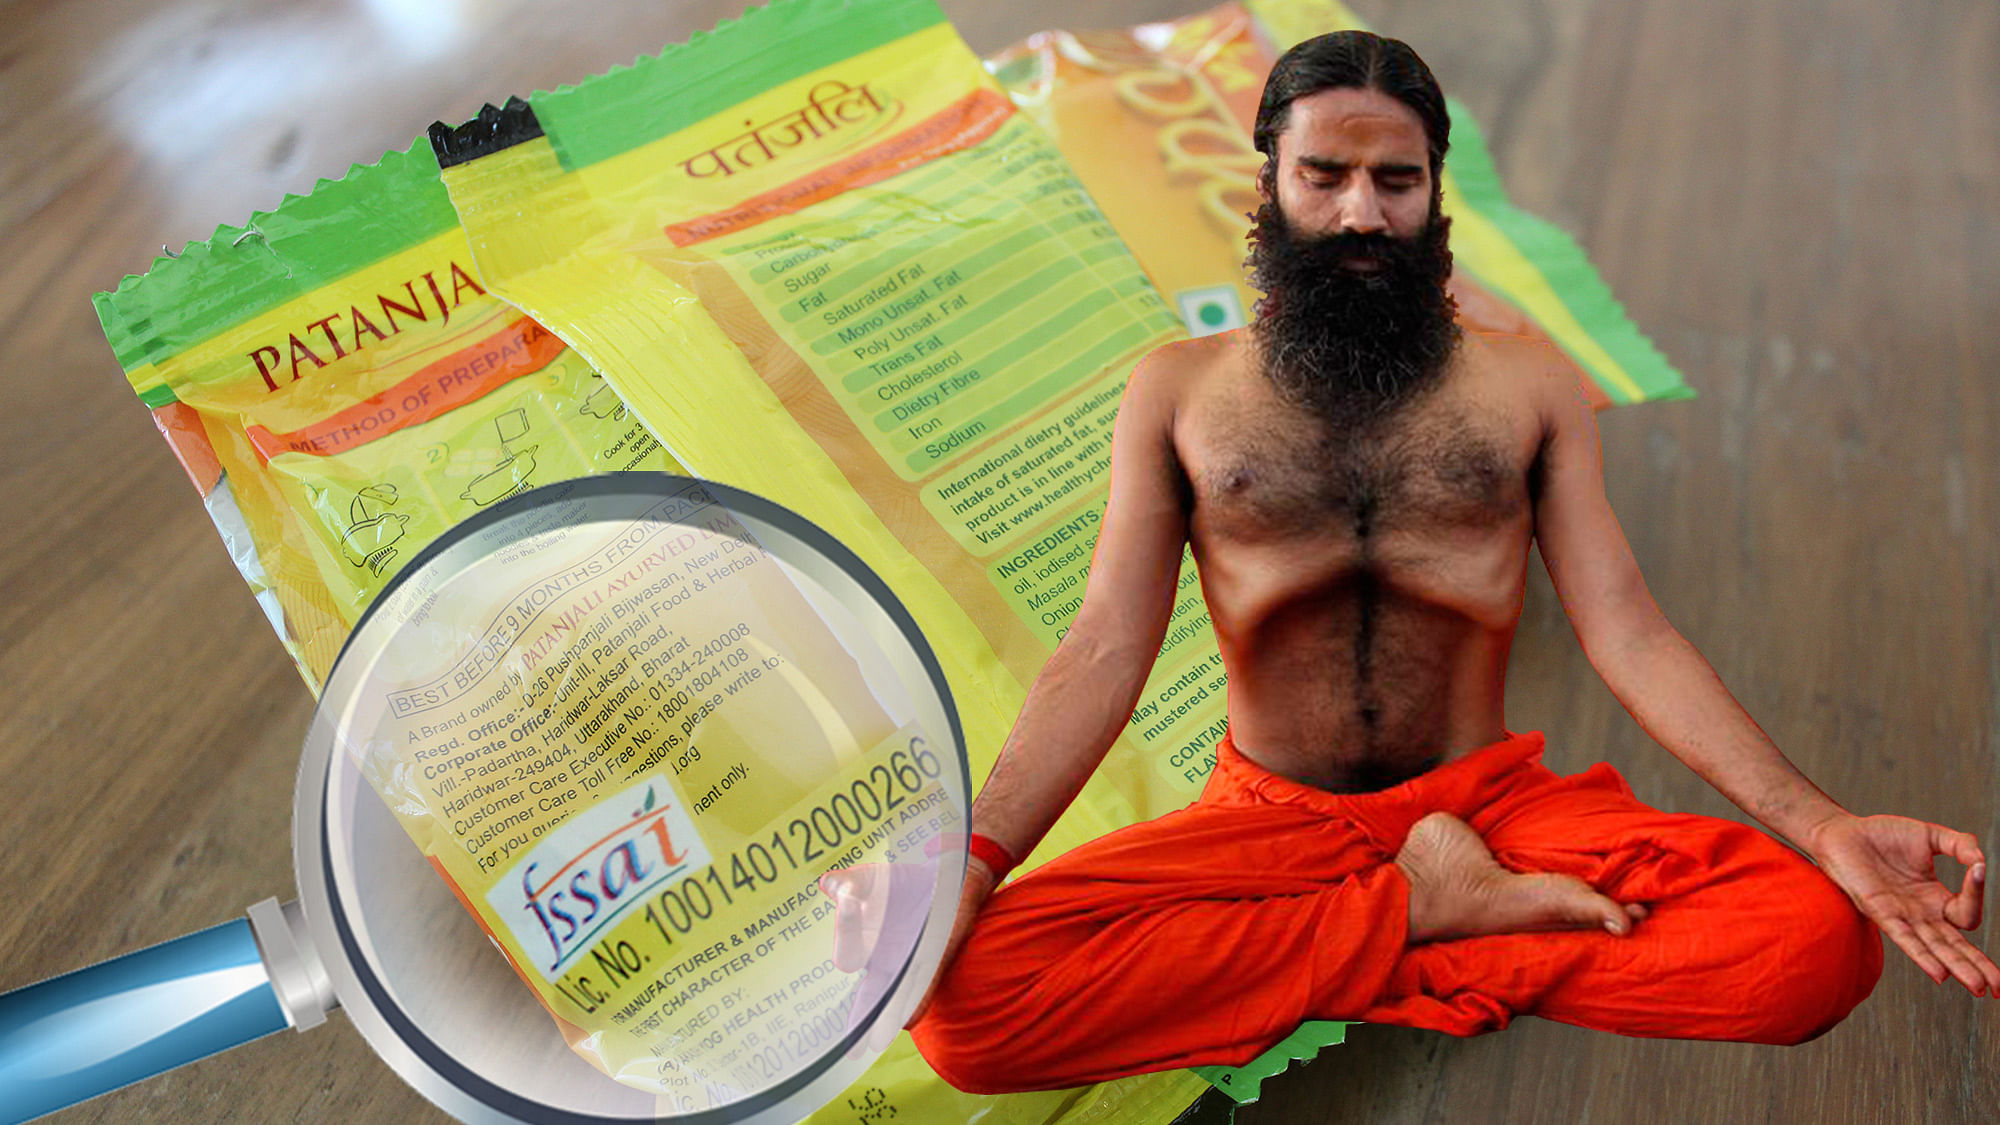 Guess who is back in news? Baba Ramdev and Patanjali. (Photo: Aaqib Raza Khan/<b>The Quint</b>)